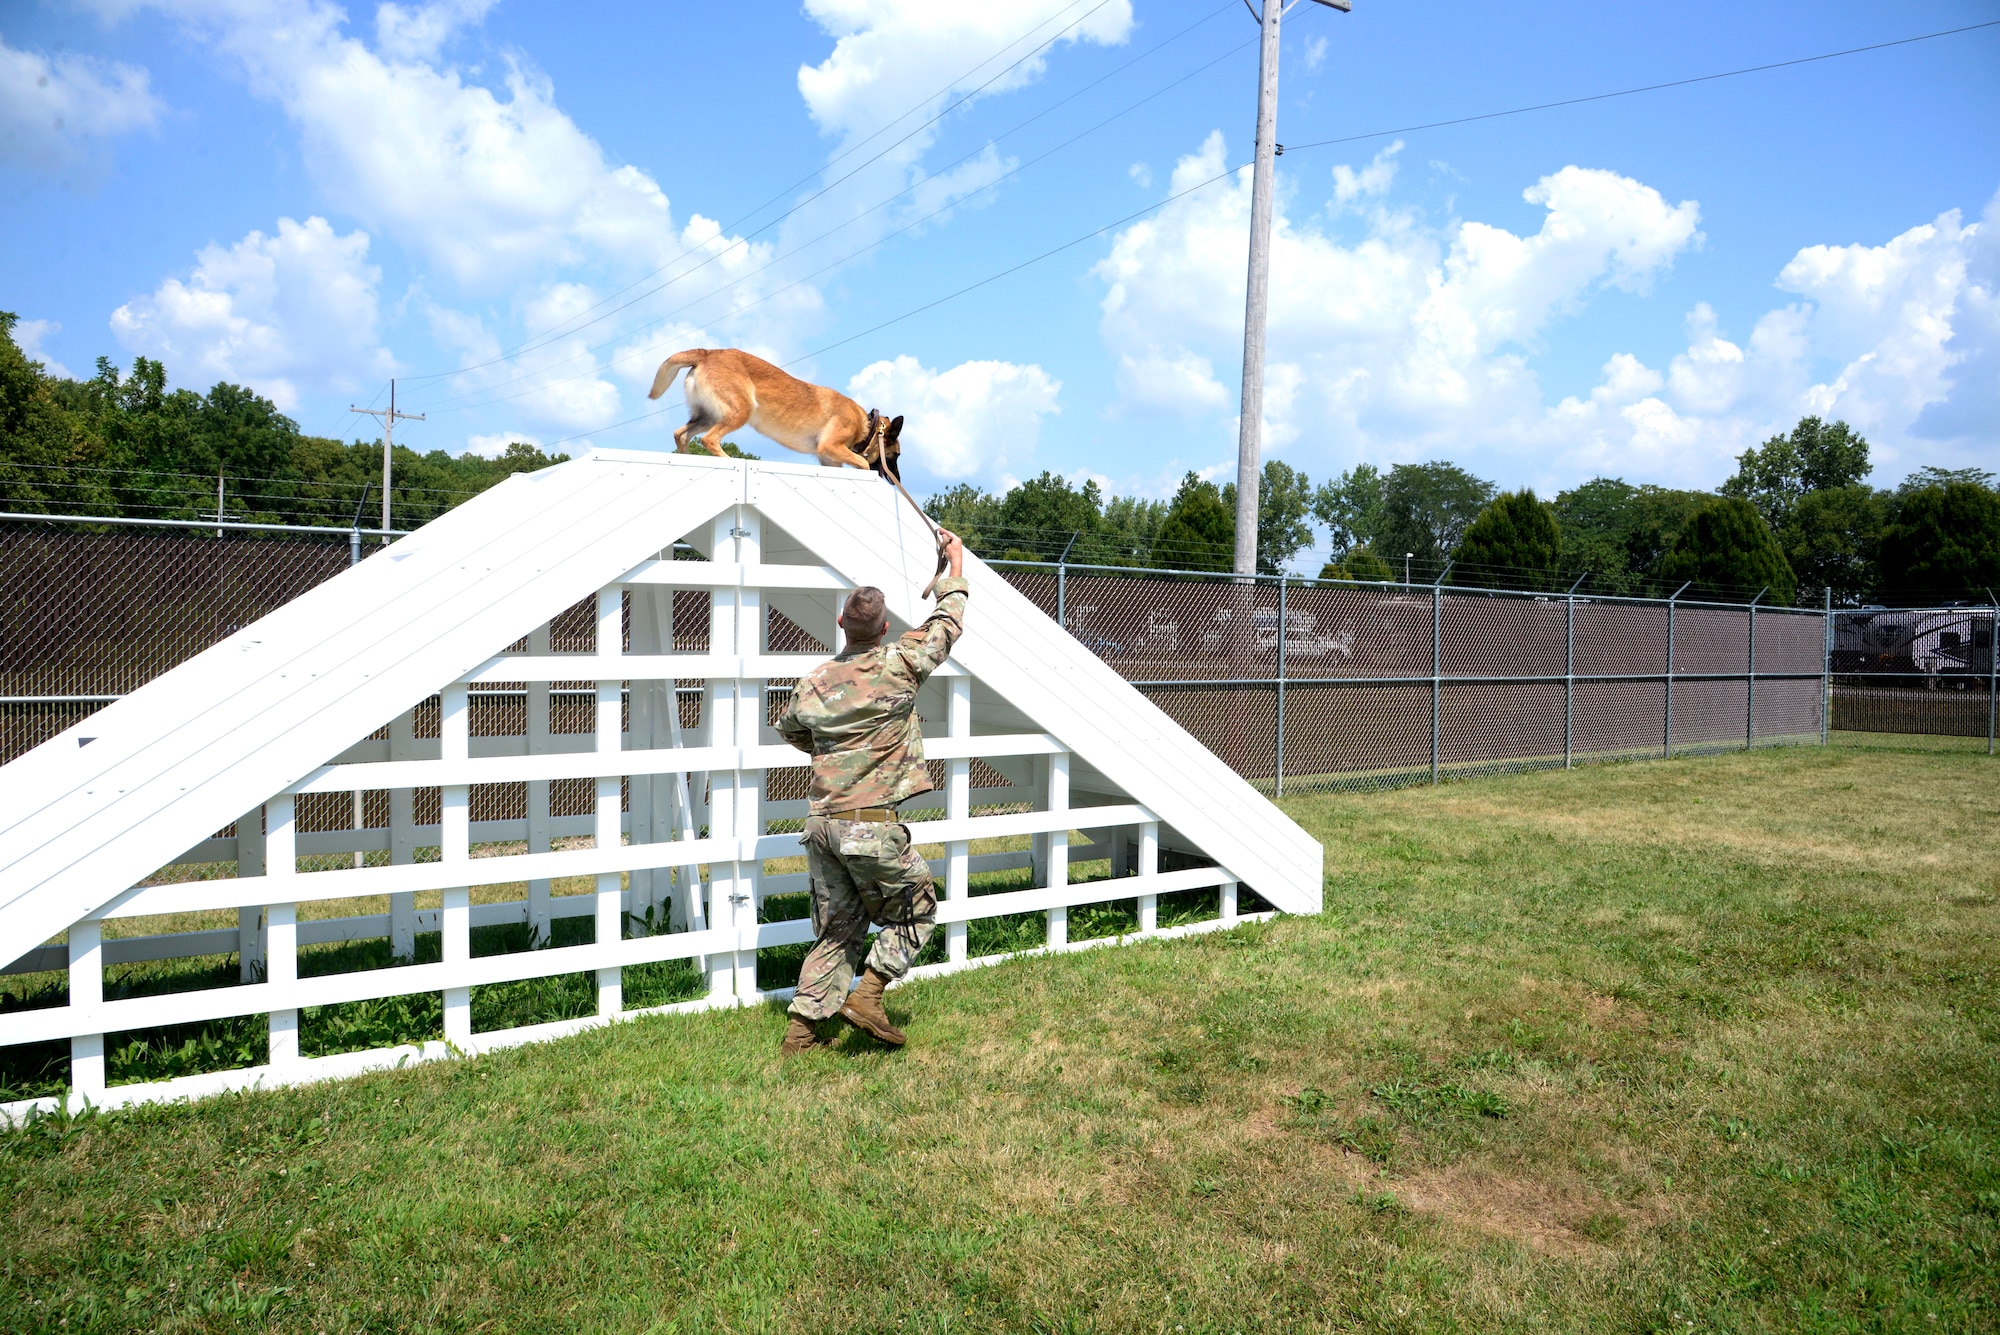 Mesha, a military working dog with the 88th Security Forces Squadron, is led over stairs Aug. 18 by her handler, Staff Sgt. Matthew Watkins, on the new obstacle course at Wright-Patterson Air Force Base. (U.S. Air Force photo by Airman 1st Class Jack Gardner)